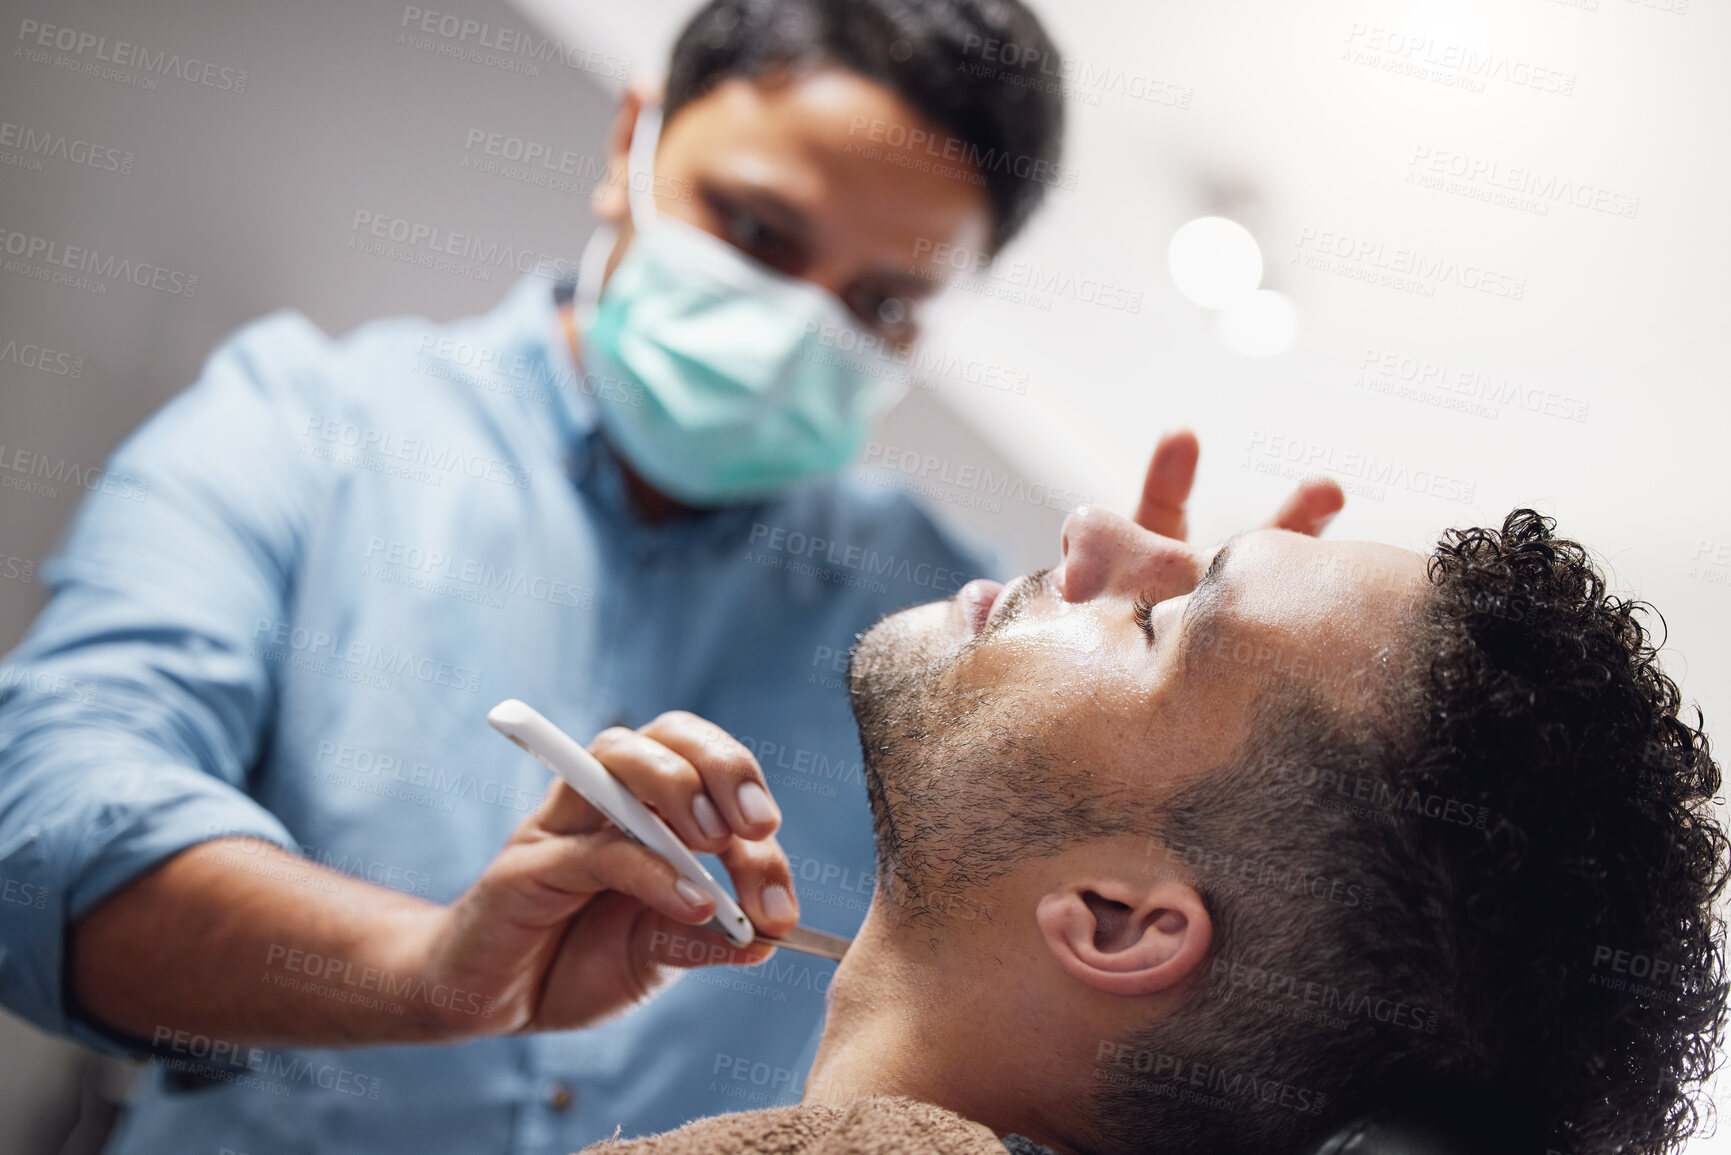 Buy stock photo Cropped shot of a handsome young man getting groomed by a barber